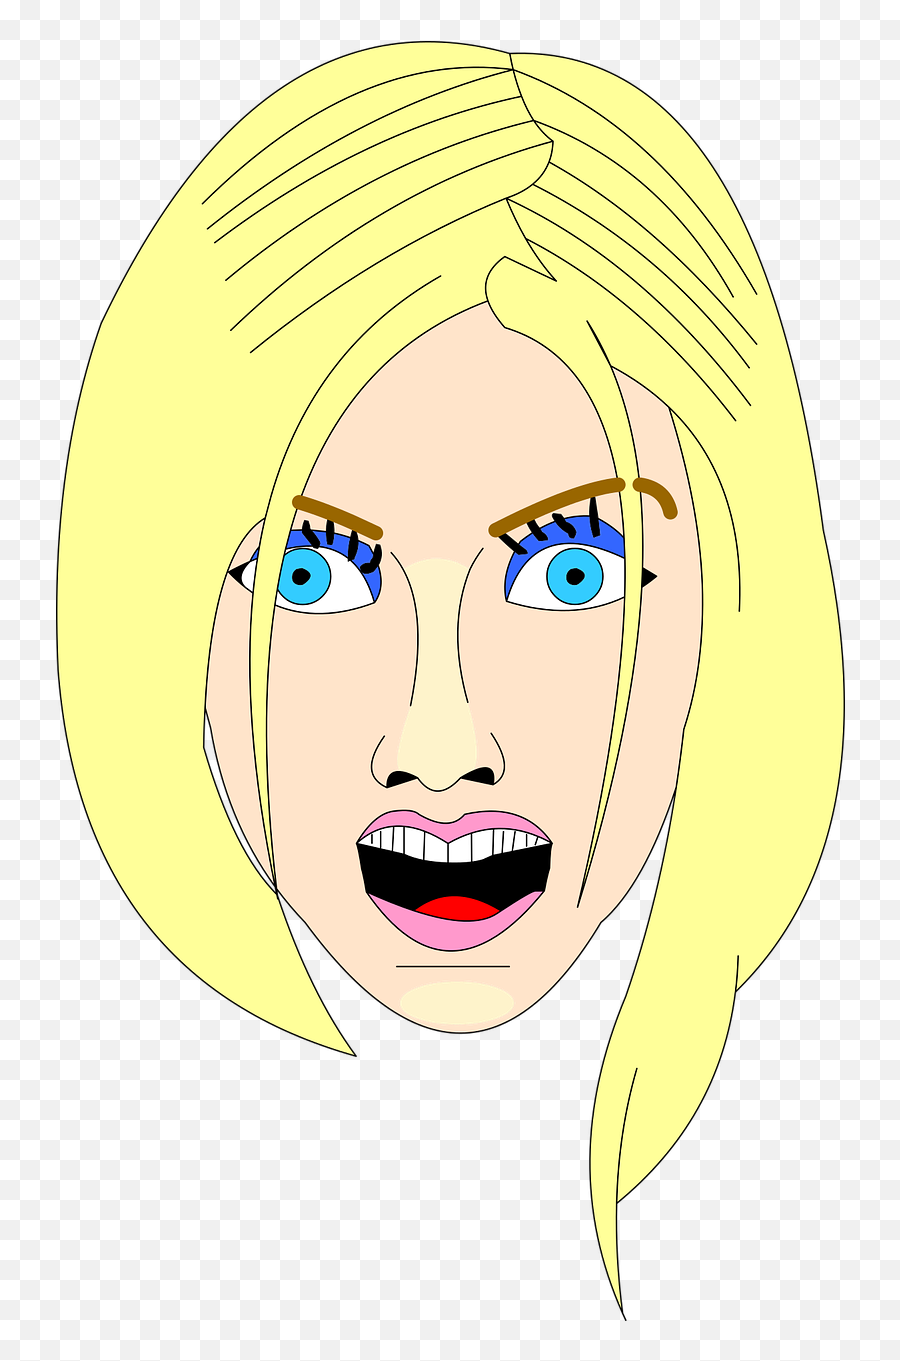 Girl Blonde Drawing - Free Vector Graphic On Pixabay Cartoon Png,Cartoon Lips Png